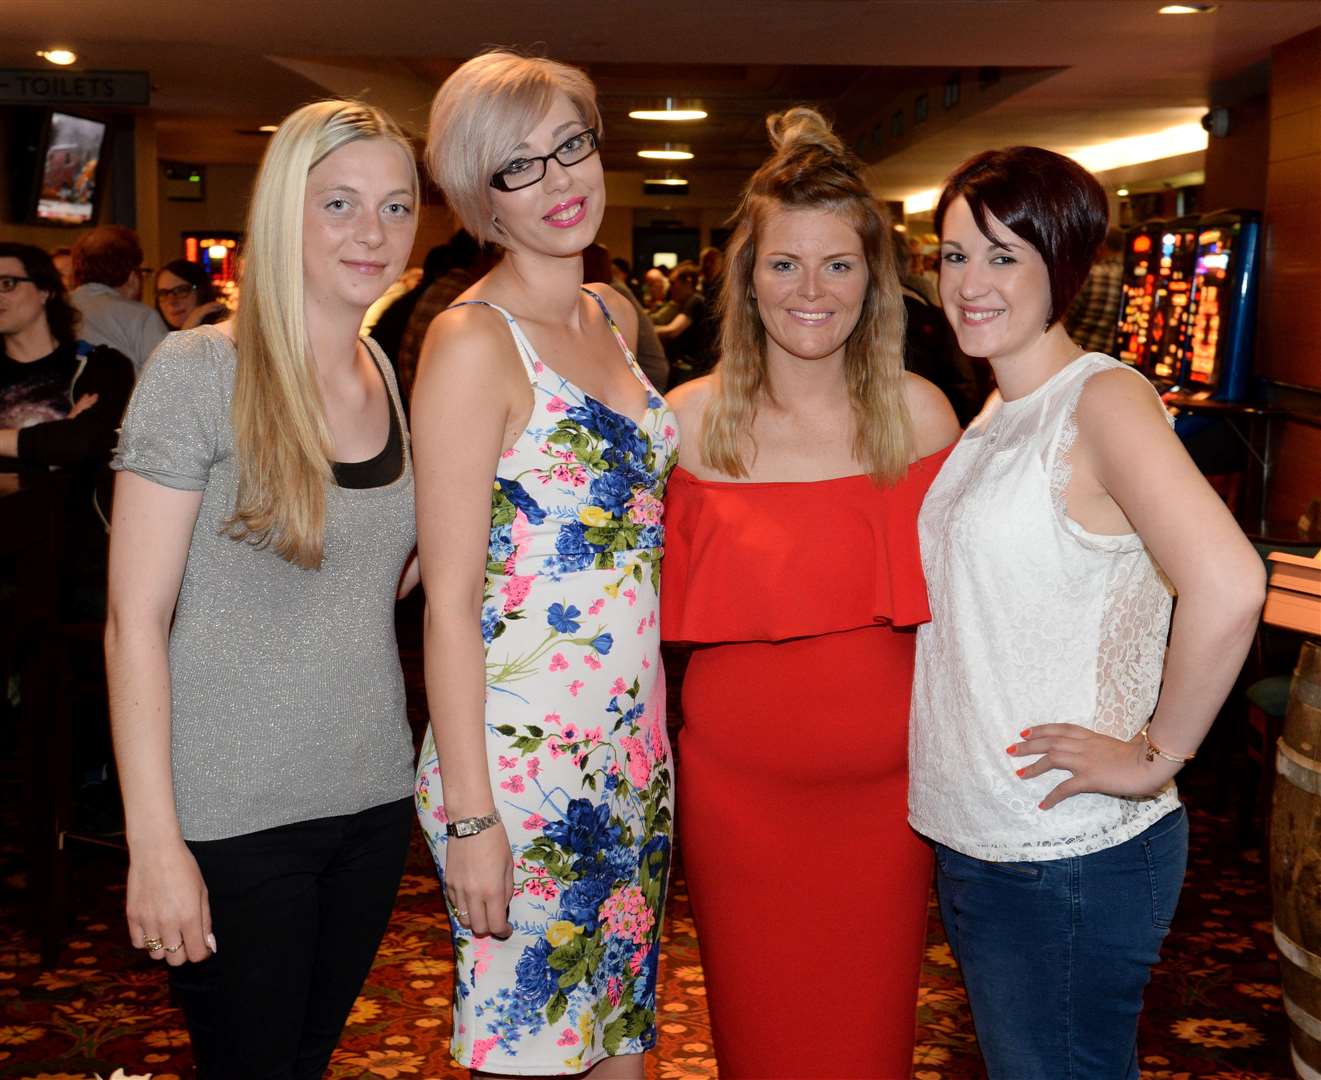 Enjoying a mums night out are (left) Hannah Duncan, Louise Ross, Jade Buchanan and Laura Allan. Picture: Gary Anthony. Image No.034610.